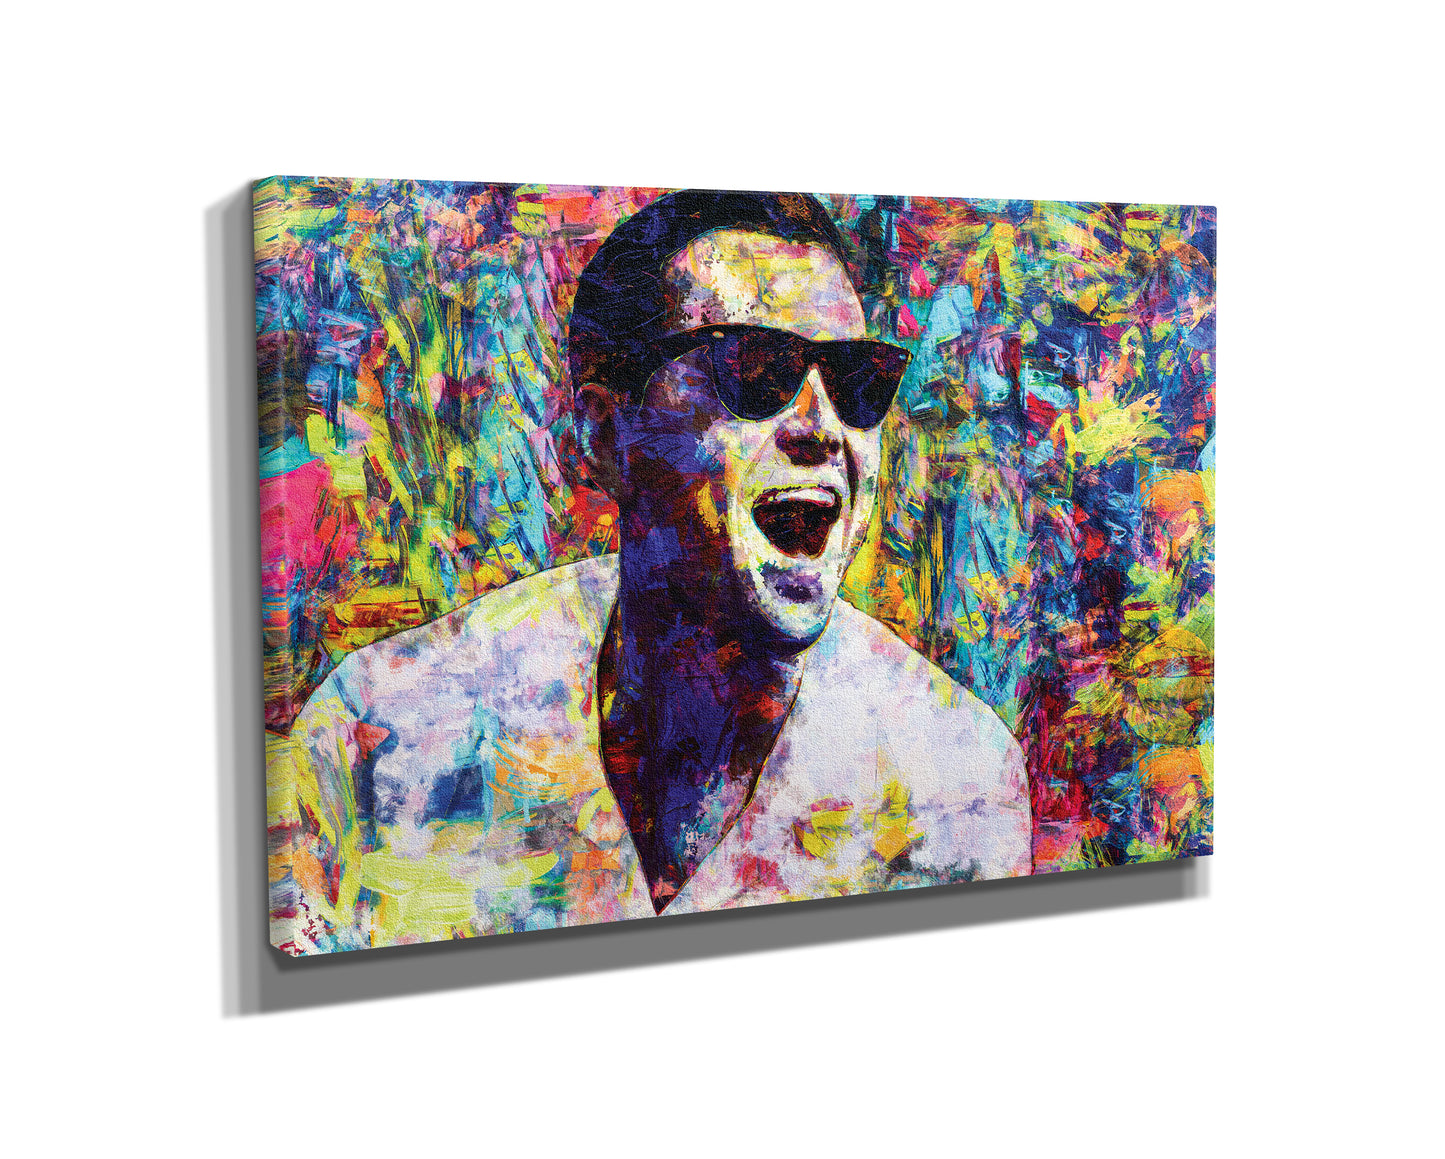 The Wolf of Wall Street 'laughing at life' Poster Leonardo Di Caprio Movie Painting Hand Made Posters Canvas Print Wall Art Home Decor